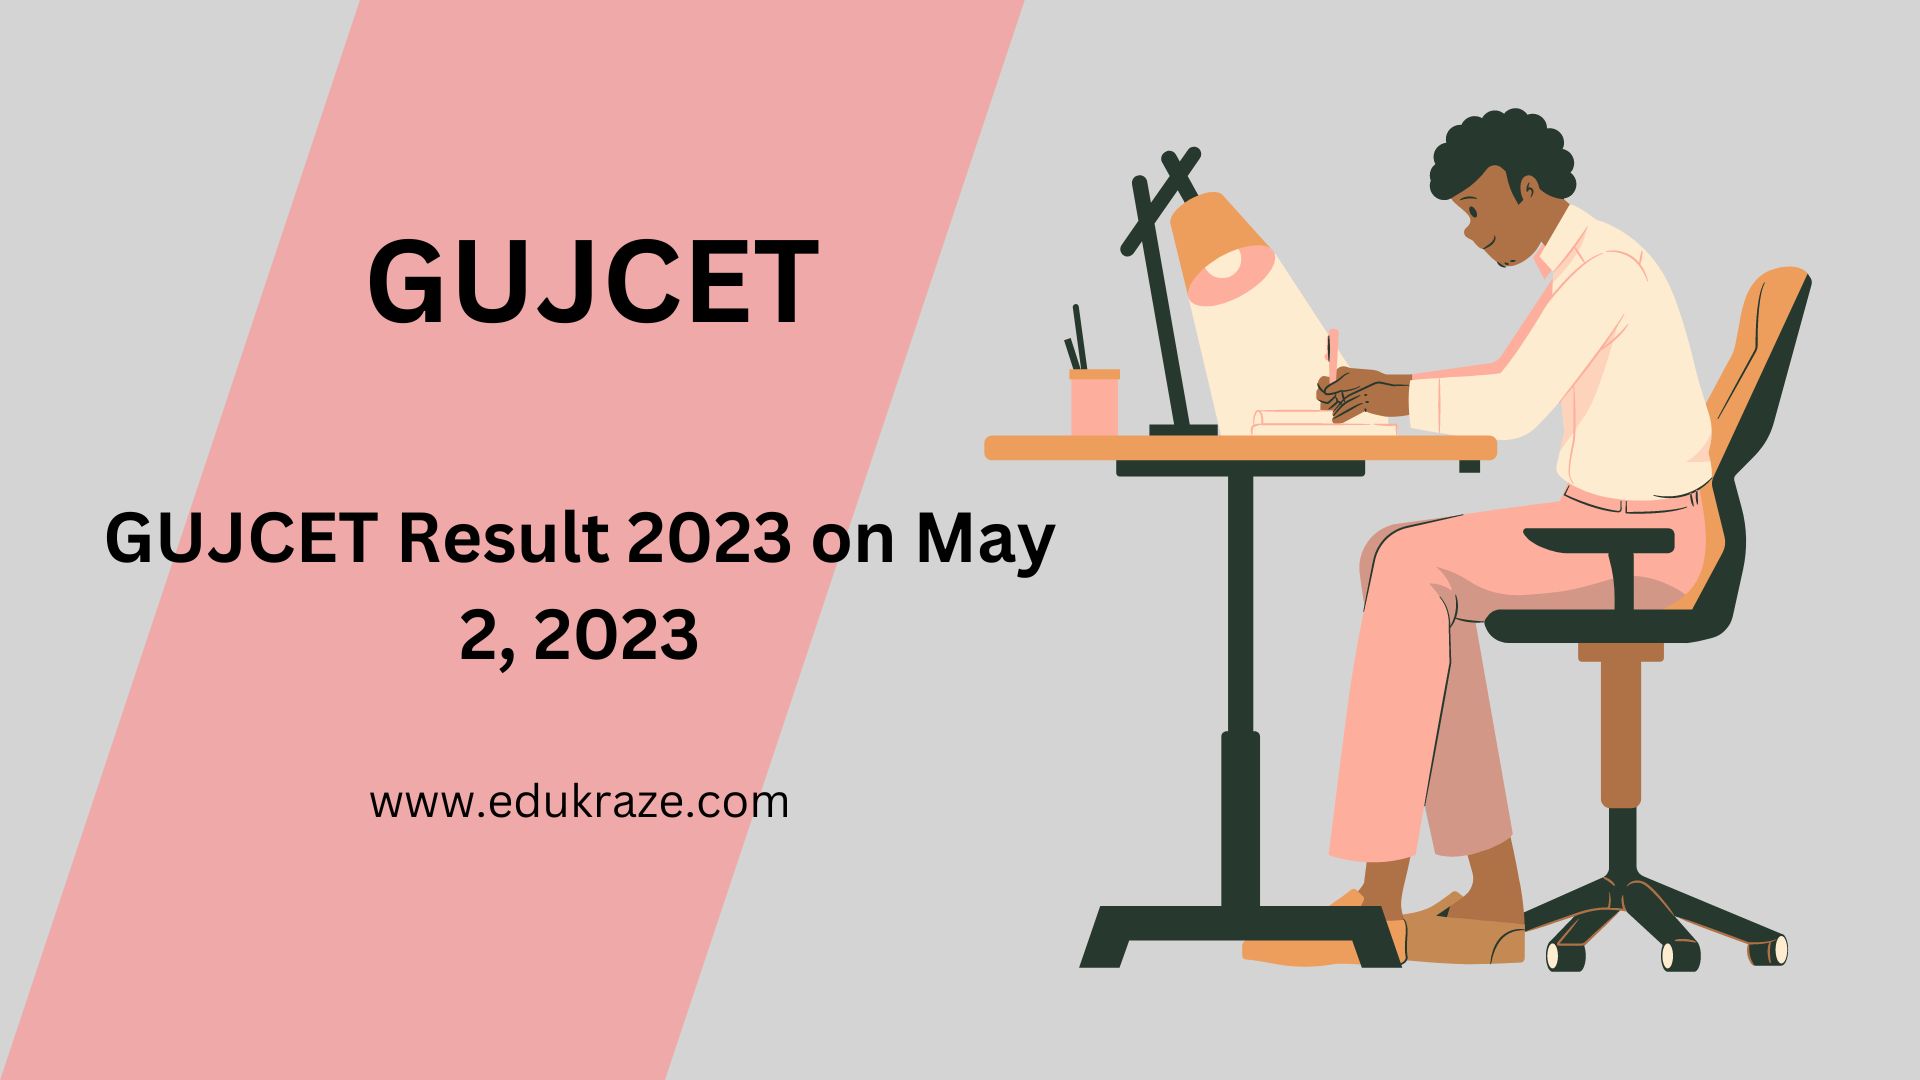 Attention GUJCET Aspirants! 2023 Results to be Announced Tomorrow - Here's What You Need to Know